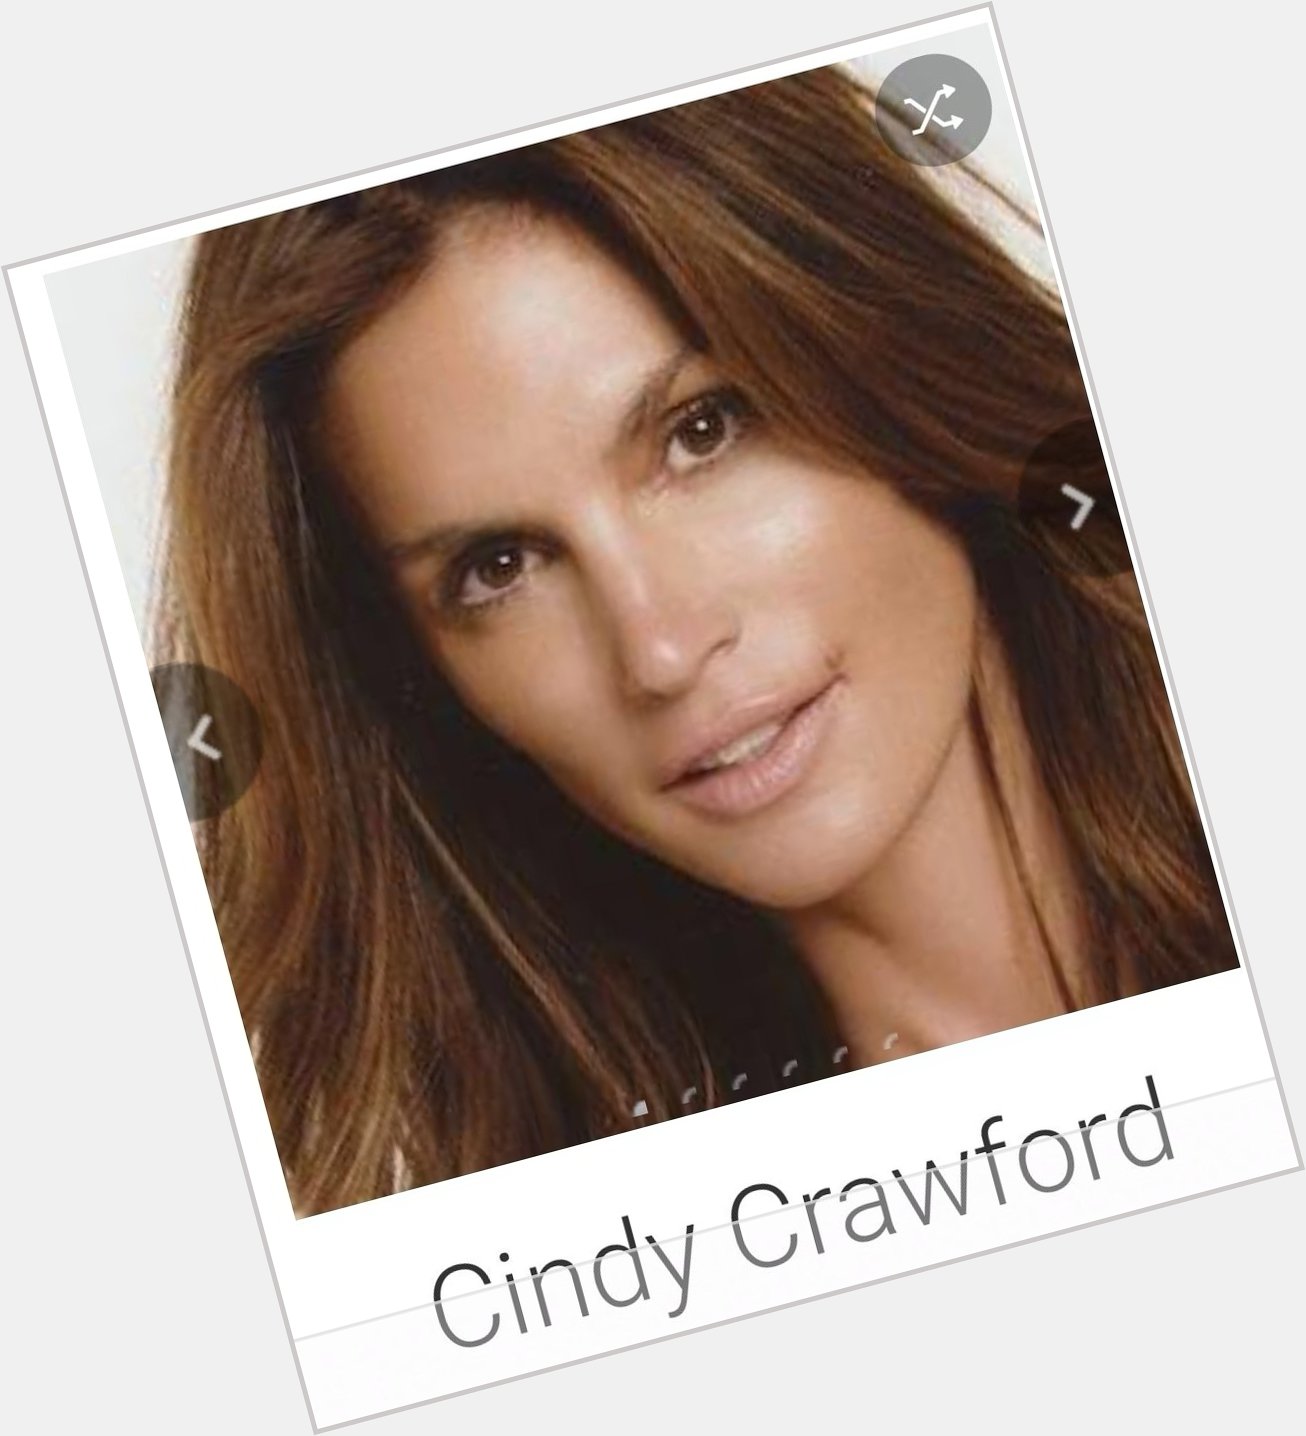 Happy Birthday to this young lady.  Happy Birthday Cindy Crawford 